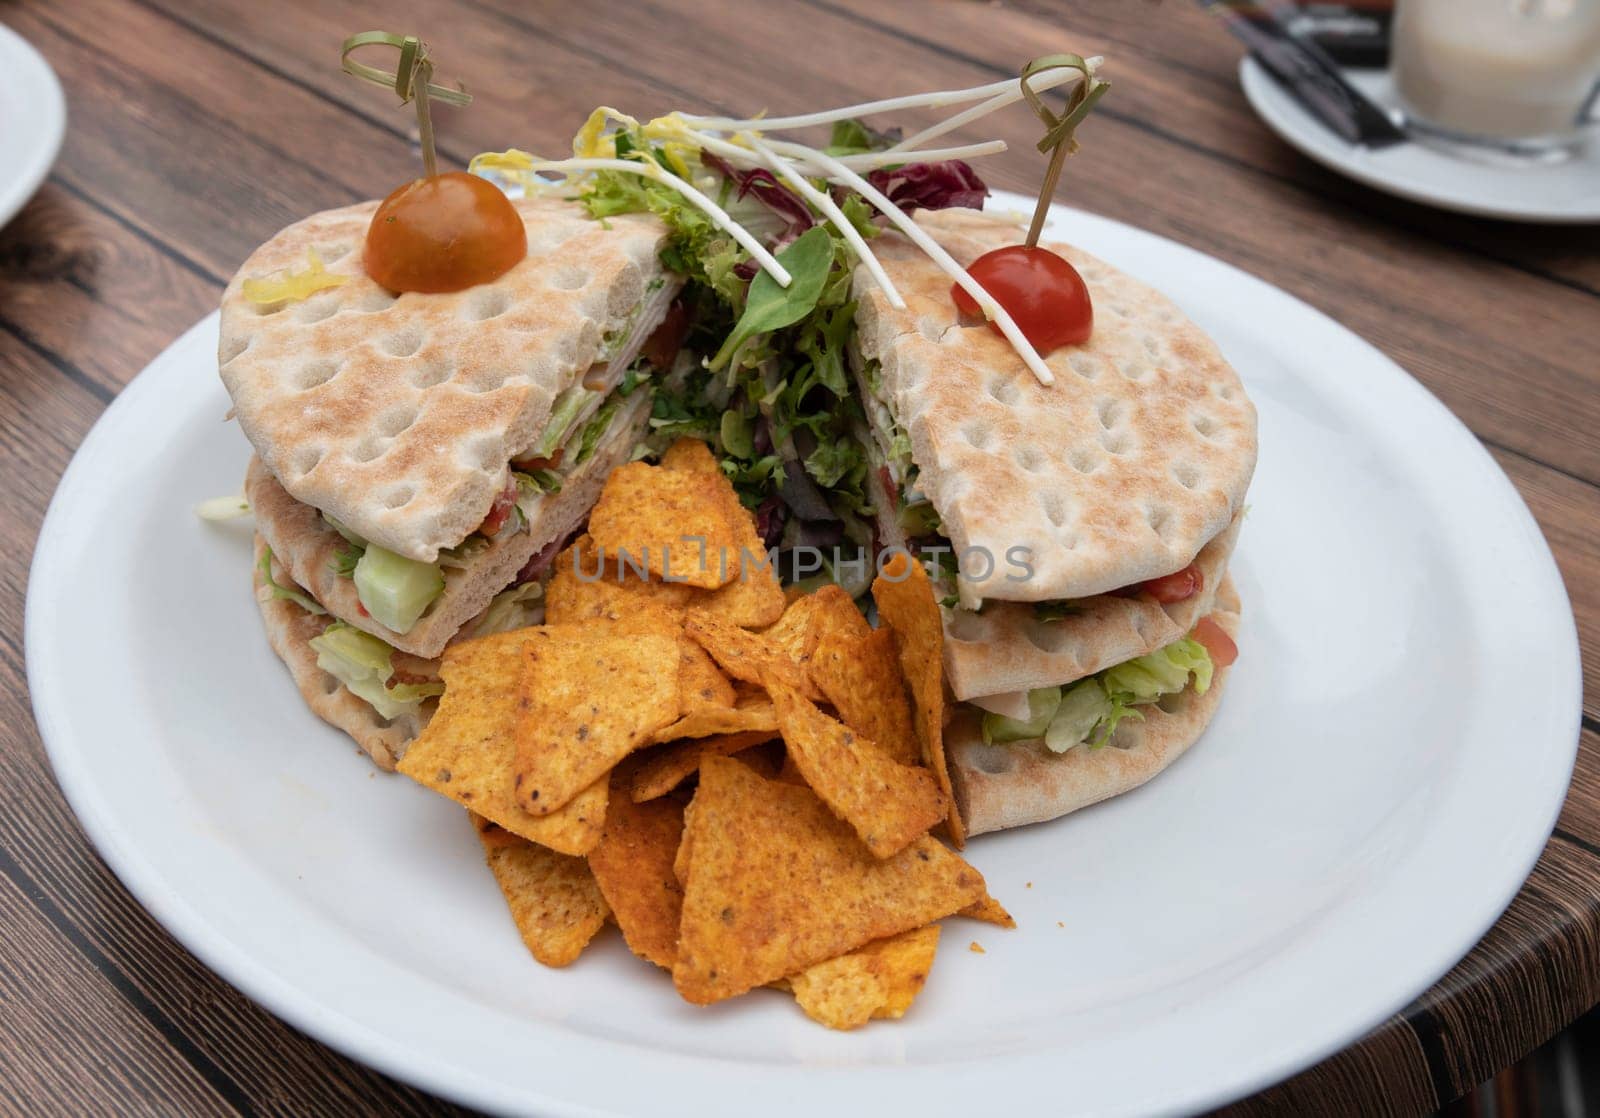 white plate wich healthy sandwich wit lettuce tomato and others on a bread by compuinfoto